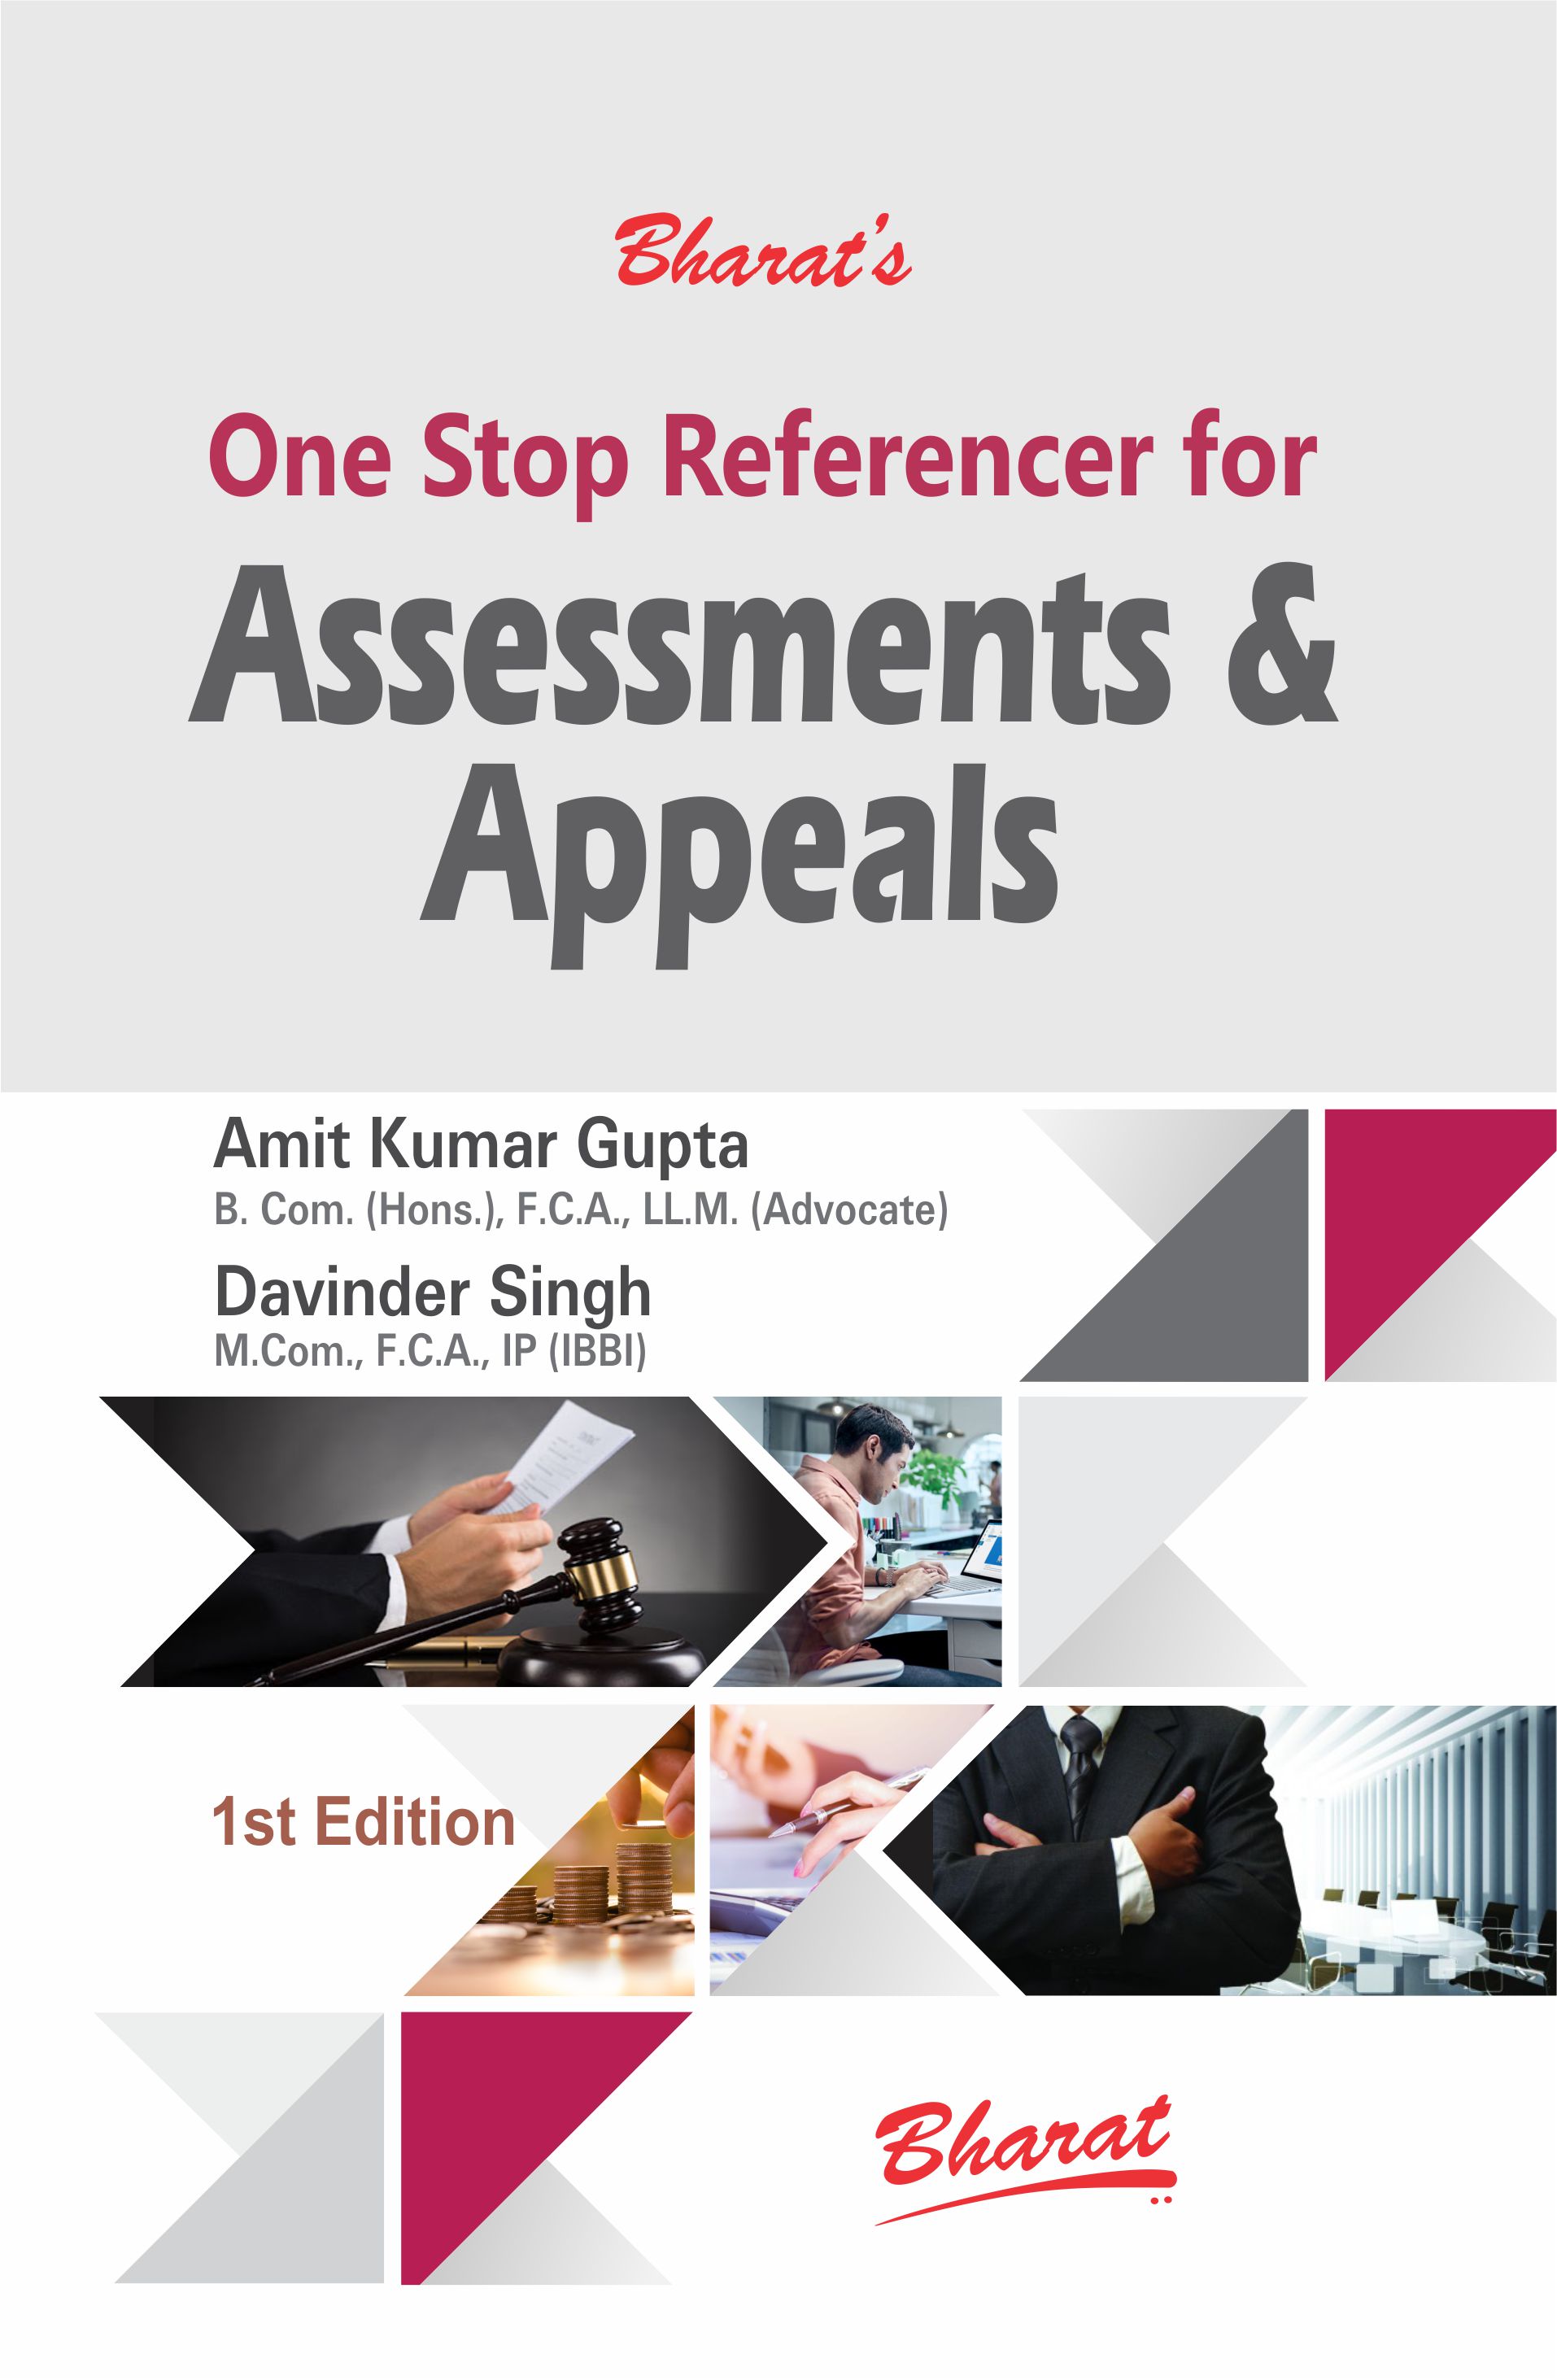 ONE STOP REFERENCER for ASSESSMENTS & APPEALS